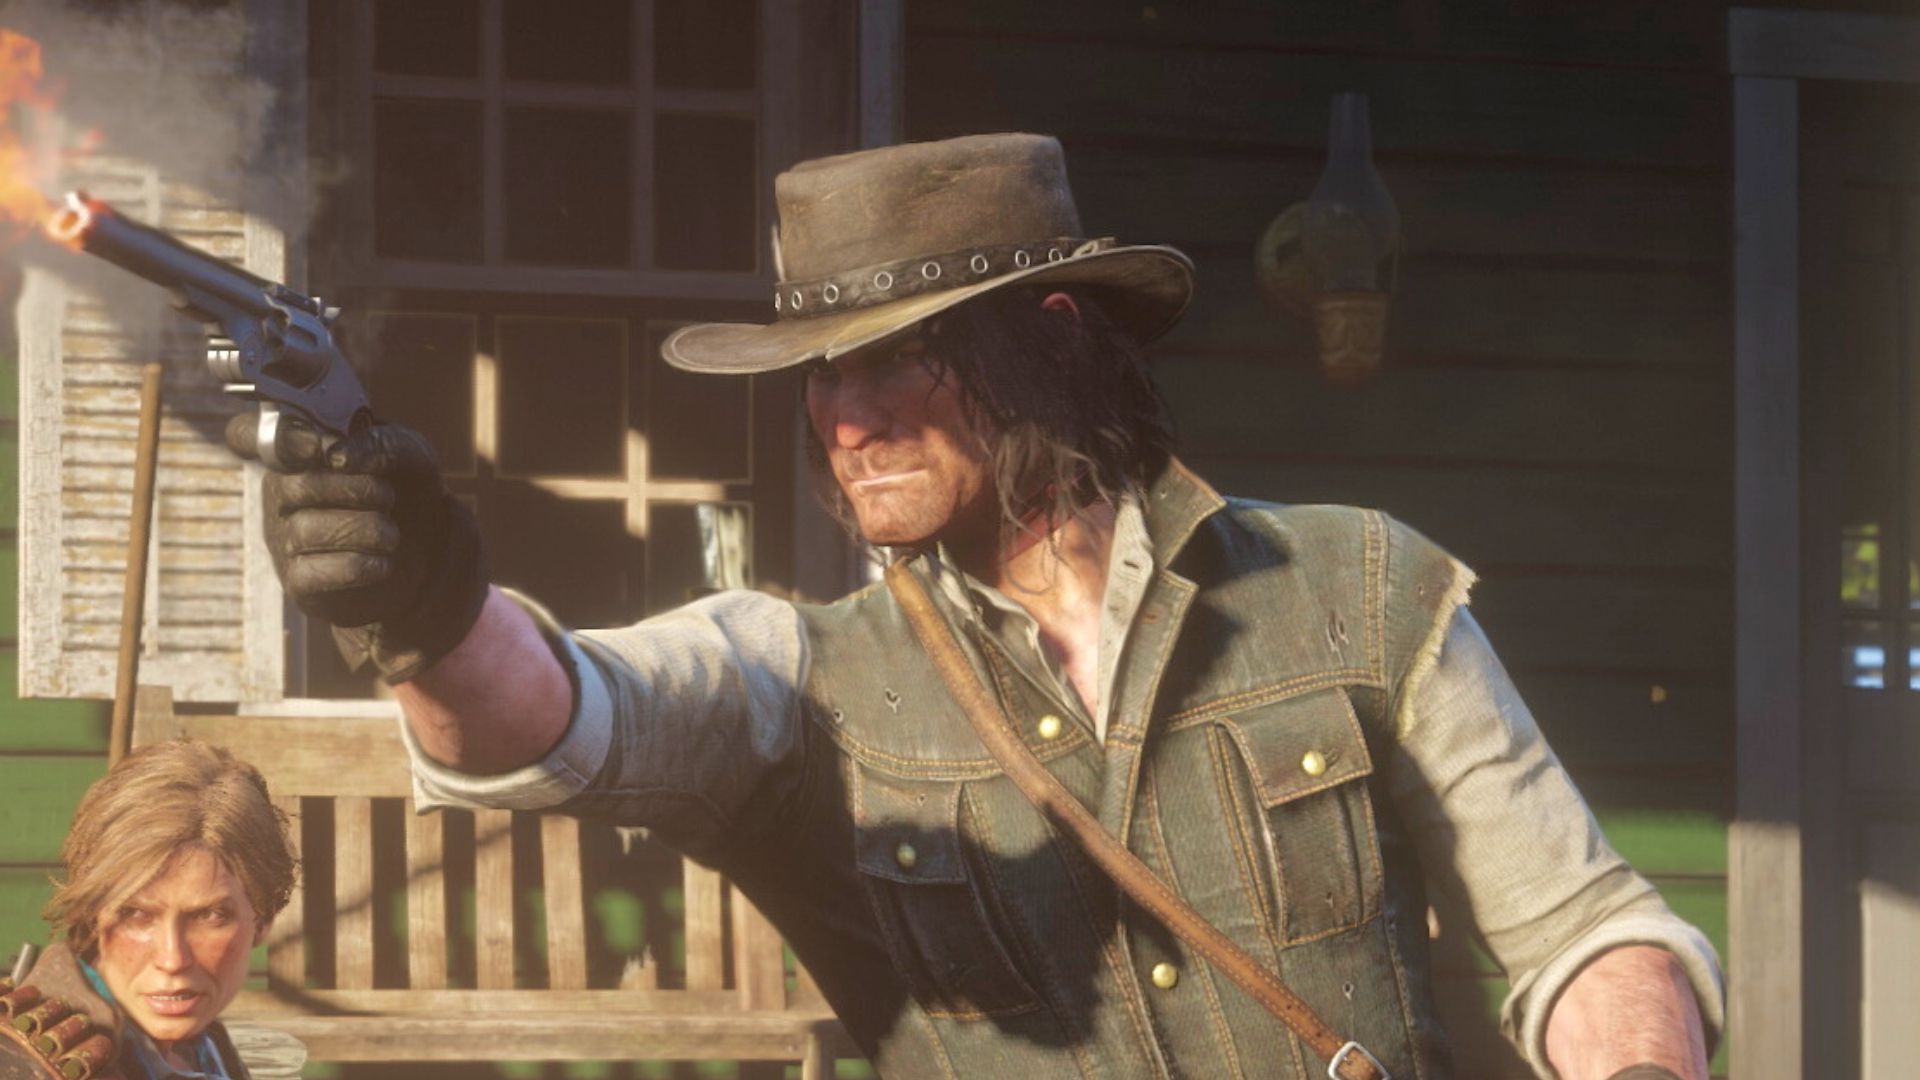 Red Dead Redemption 2 wins surprising Steam award, everyone hates it